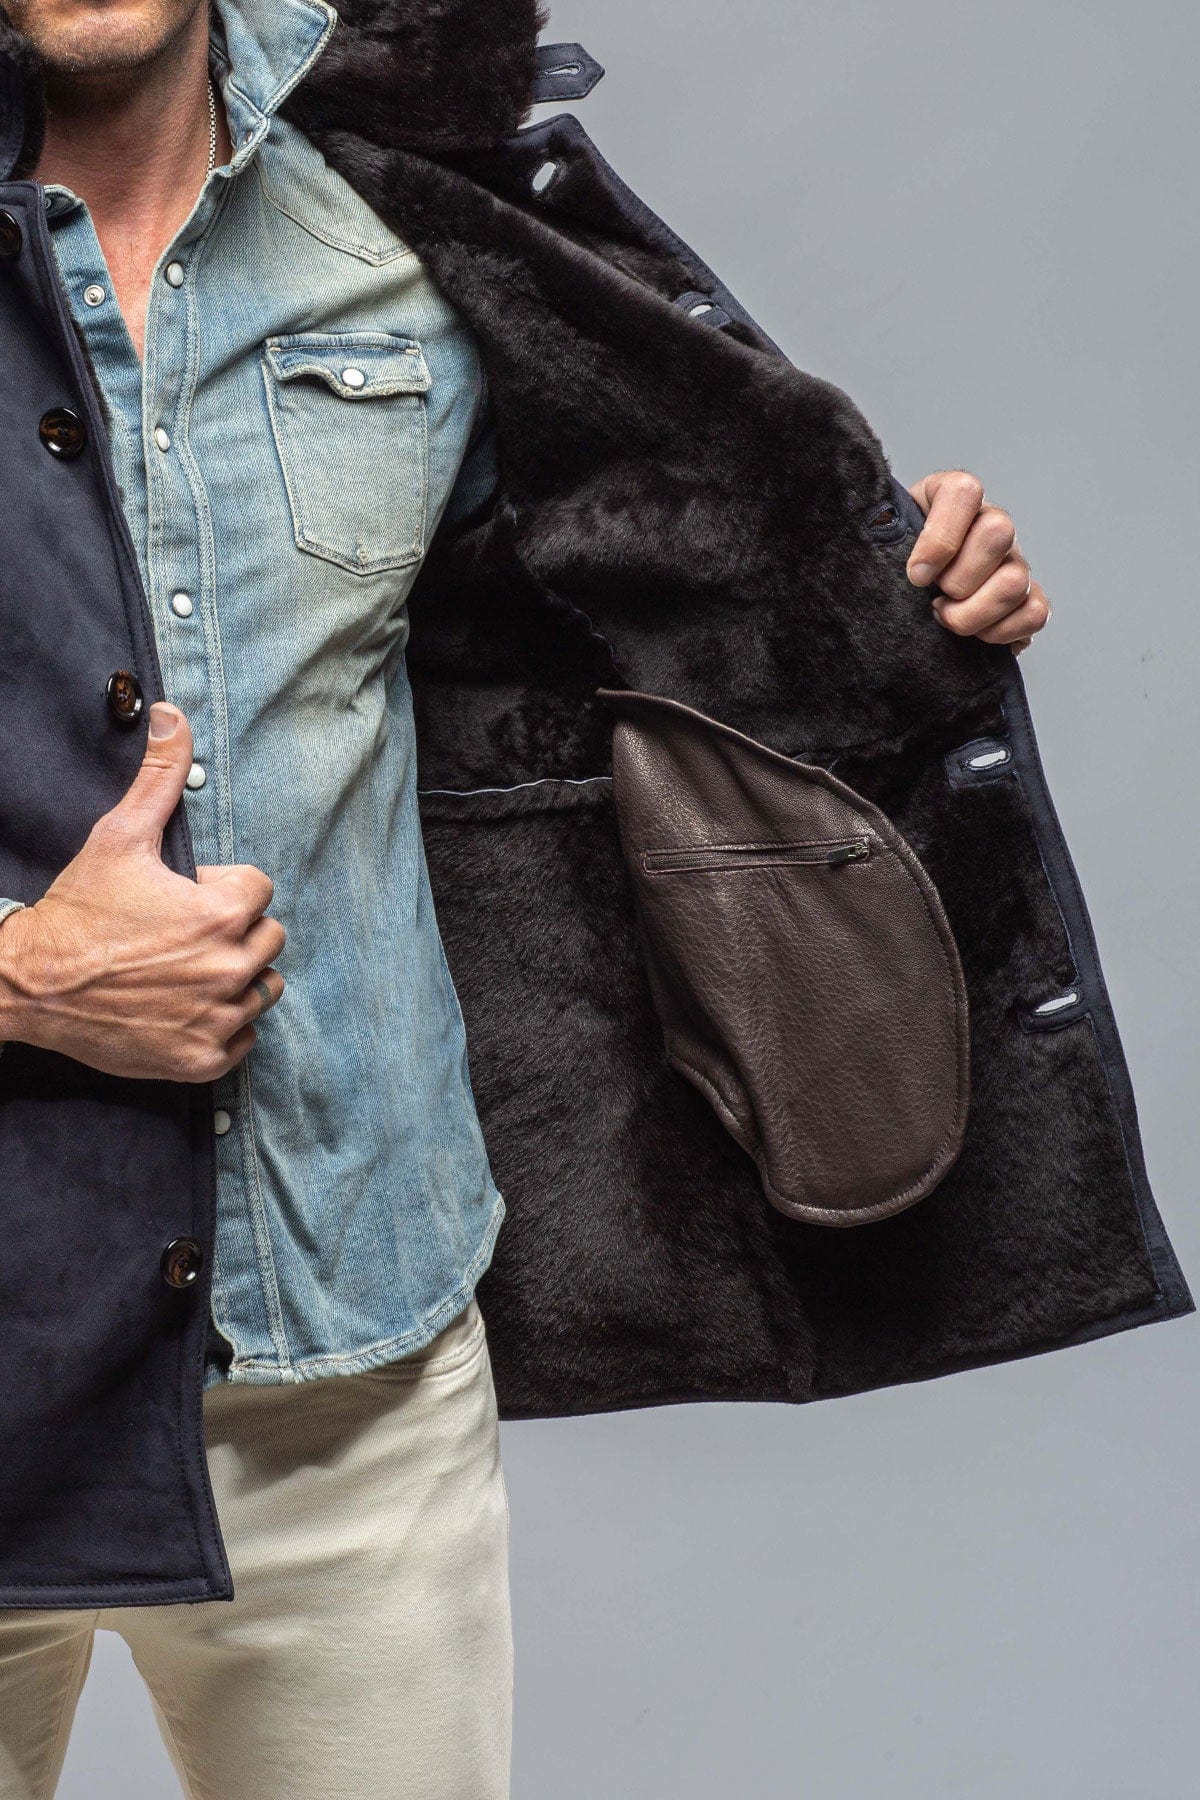 Piney Shearling In Navy | Mens - Outerwear - Shearling | Gimo's